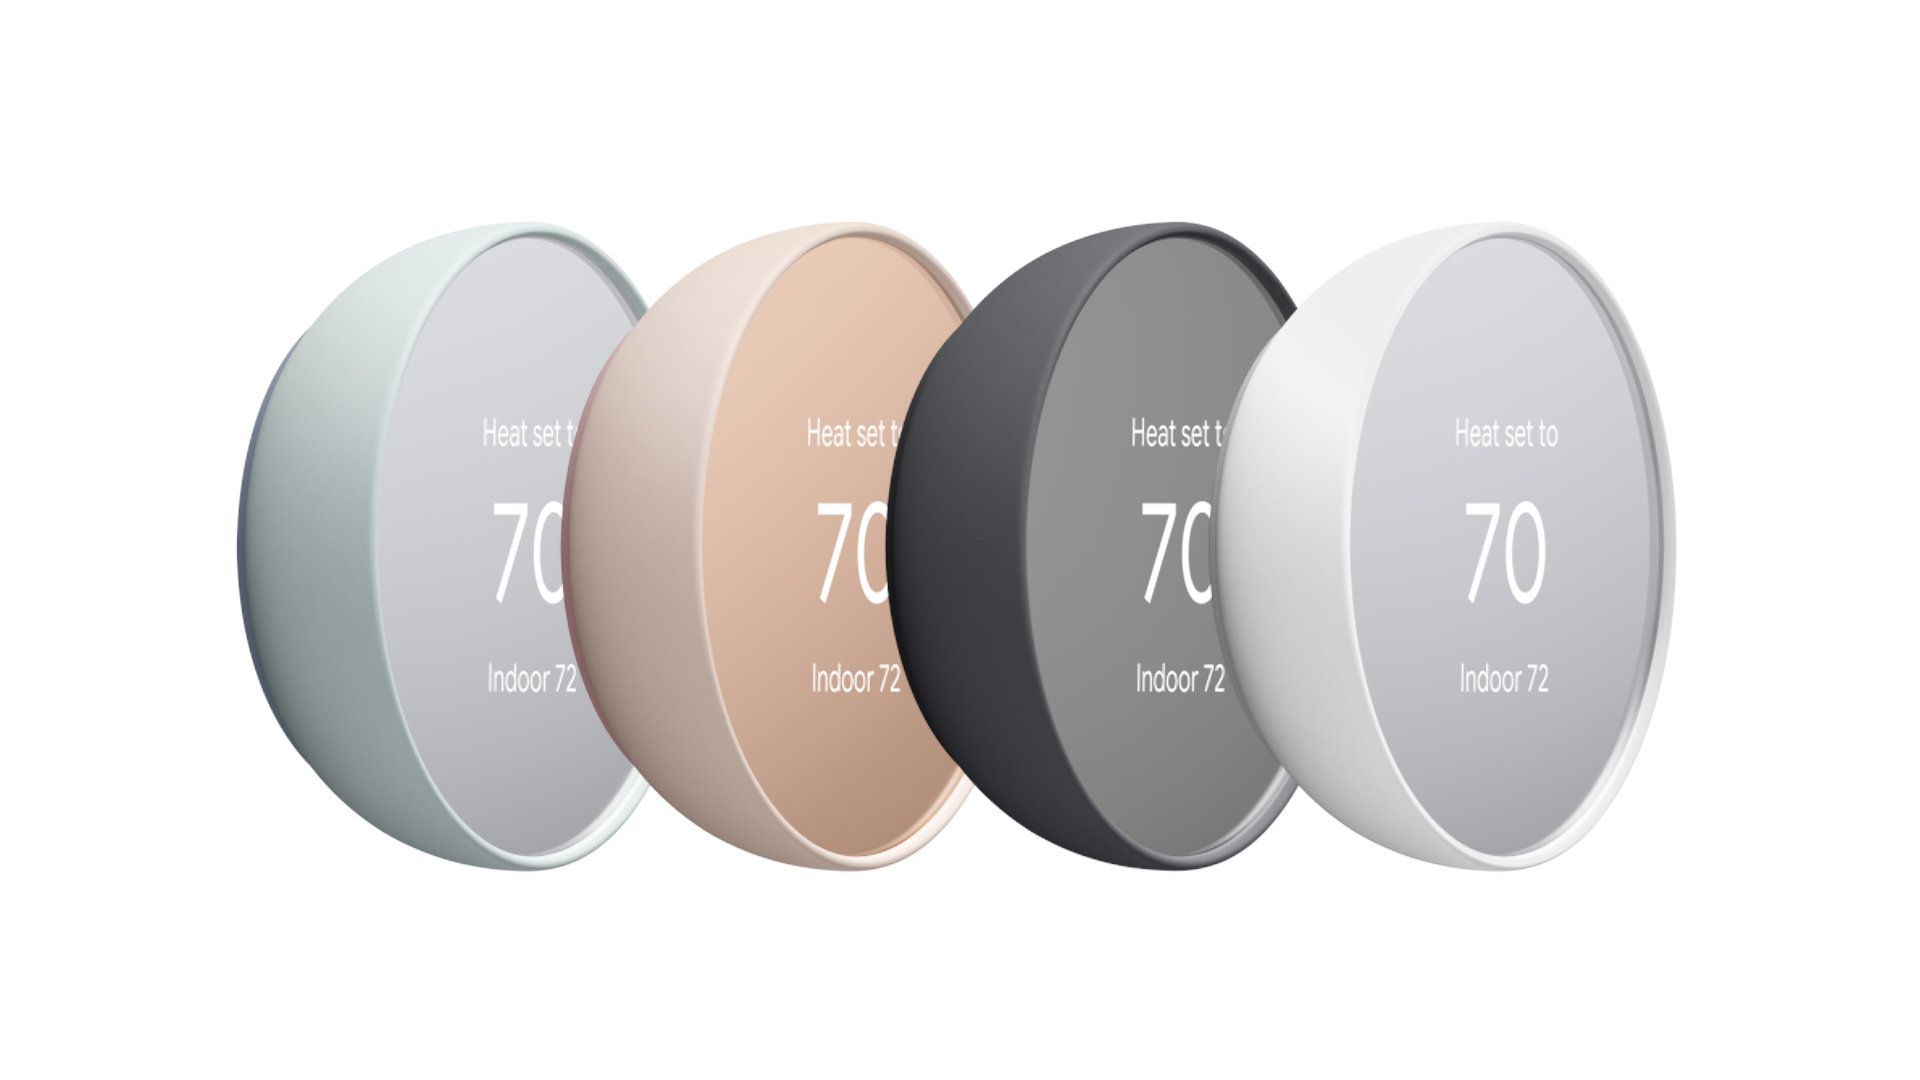 Google Nest Thermostats have a variety of colors with screen and body tints.